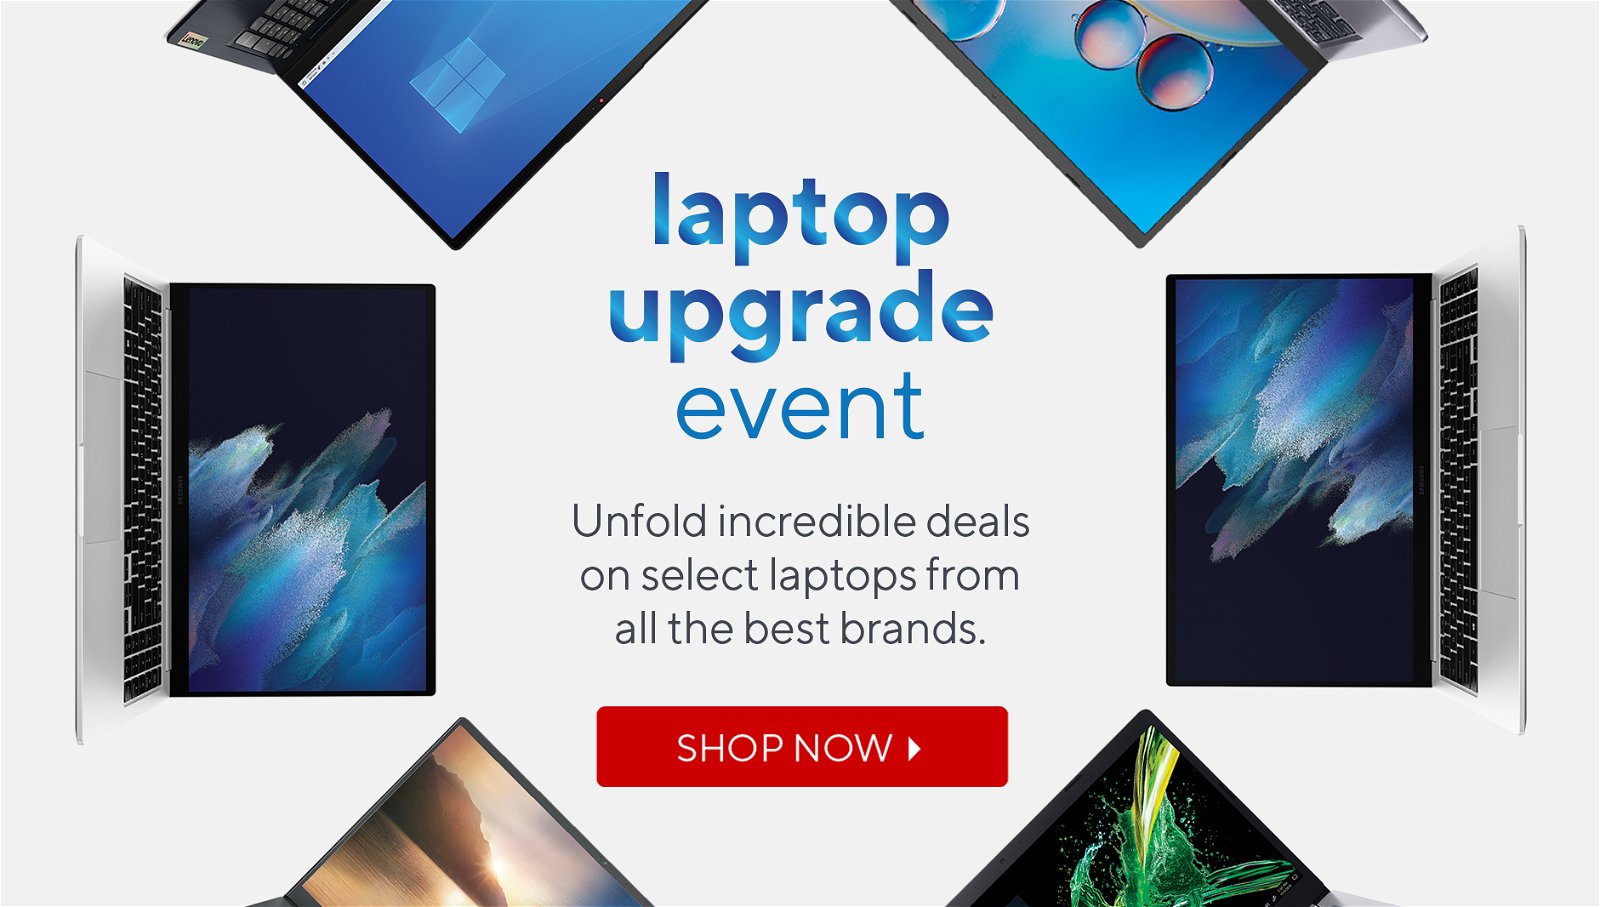 Laptop upgrade event | Unfold incredible deals on select laptops from all the best brands.